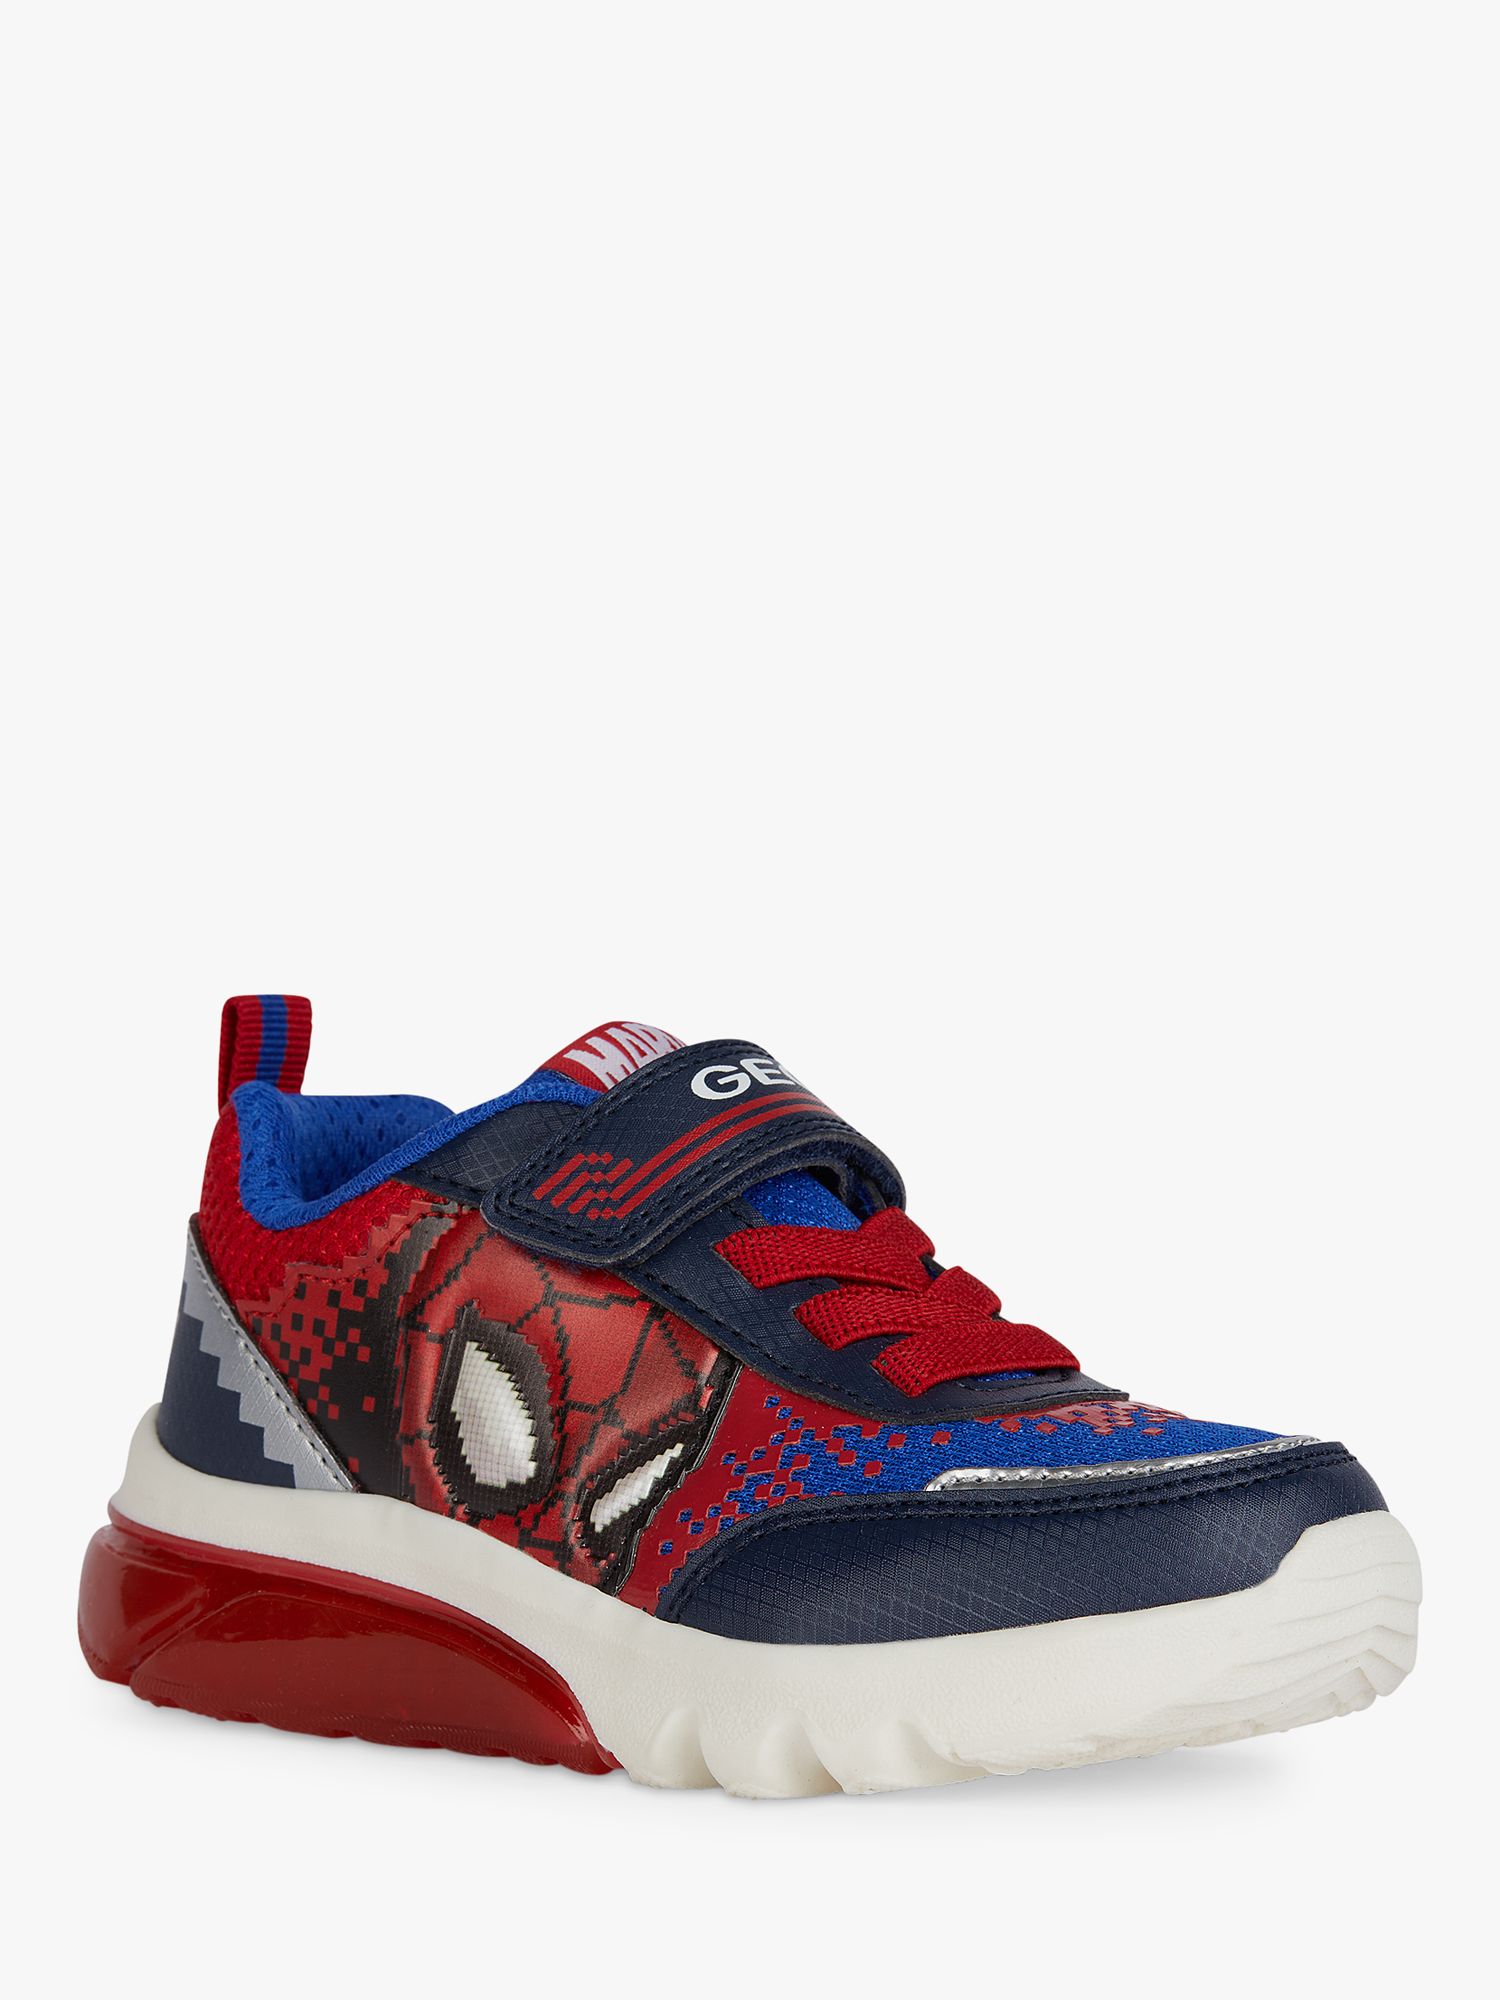 Buy Geox Kids' Ciberdron Spiderman Light Up Trainers, Navy/Red/White Online at johnlewis.com